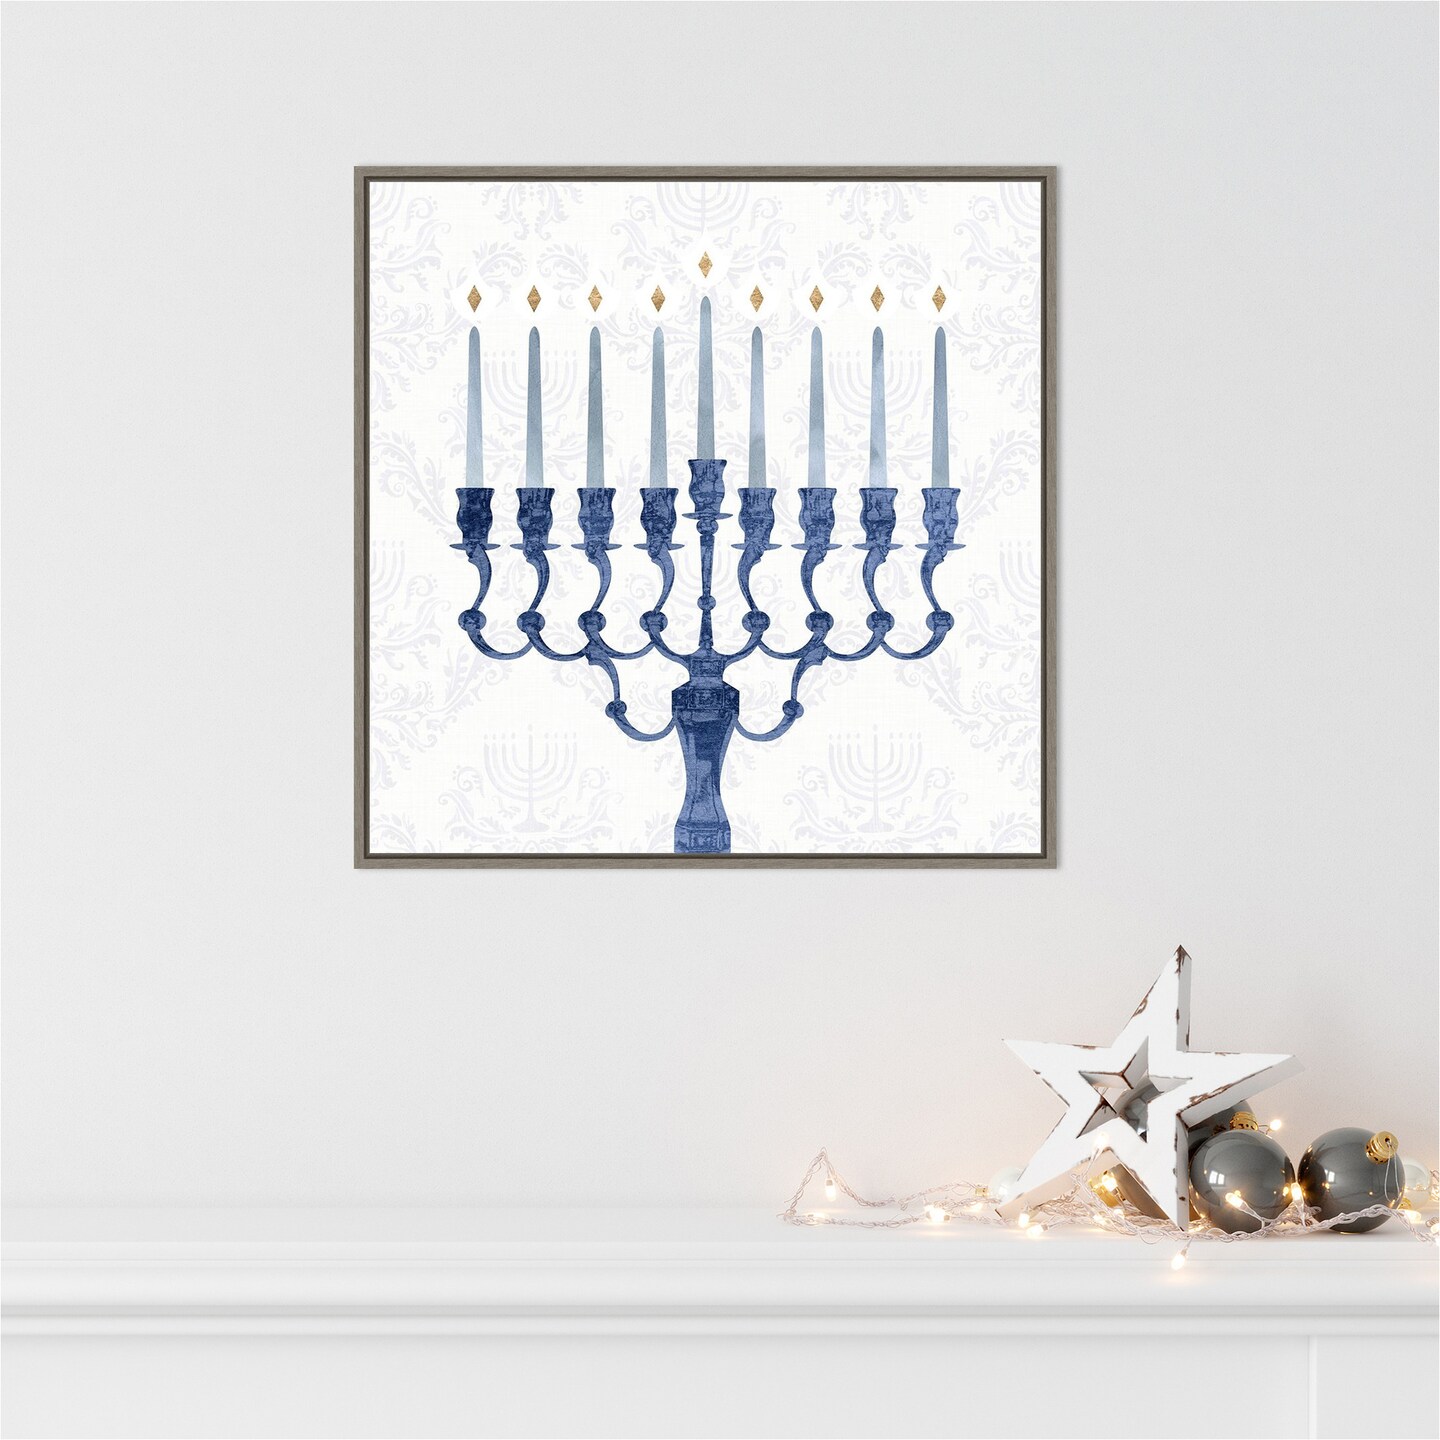 Sophisticated Hanukkah I by Victoria Borges 22-in. W x 22-in. H. Canvas Wall Art Print Framed in Grey